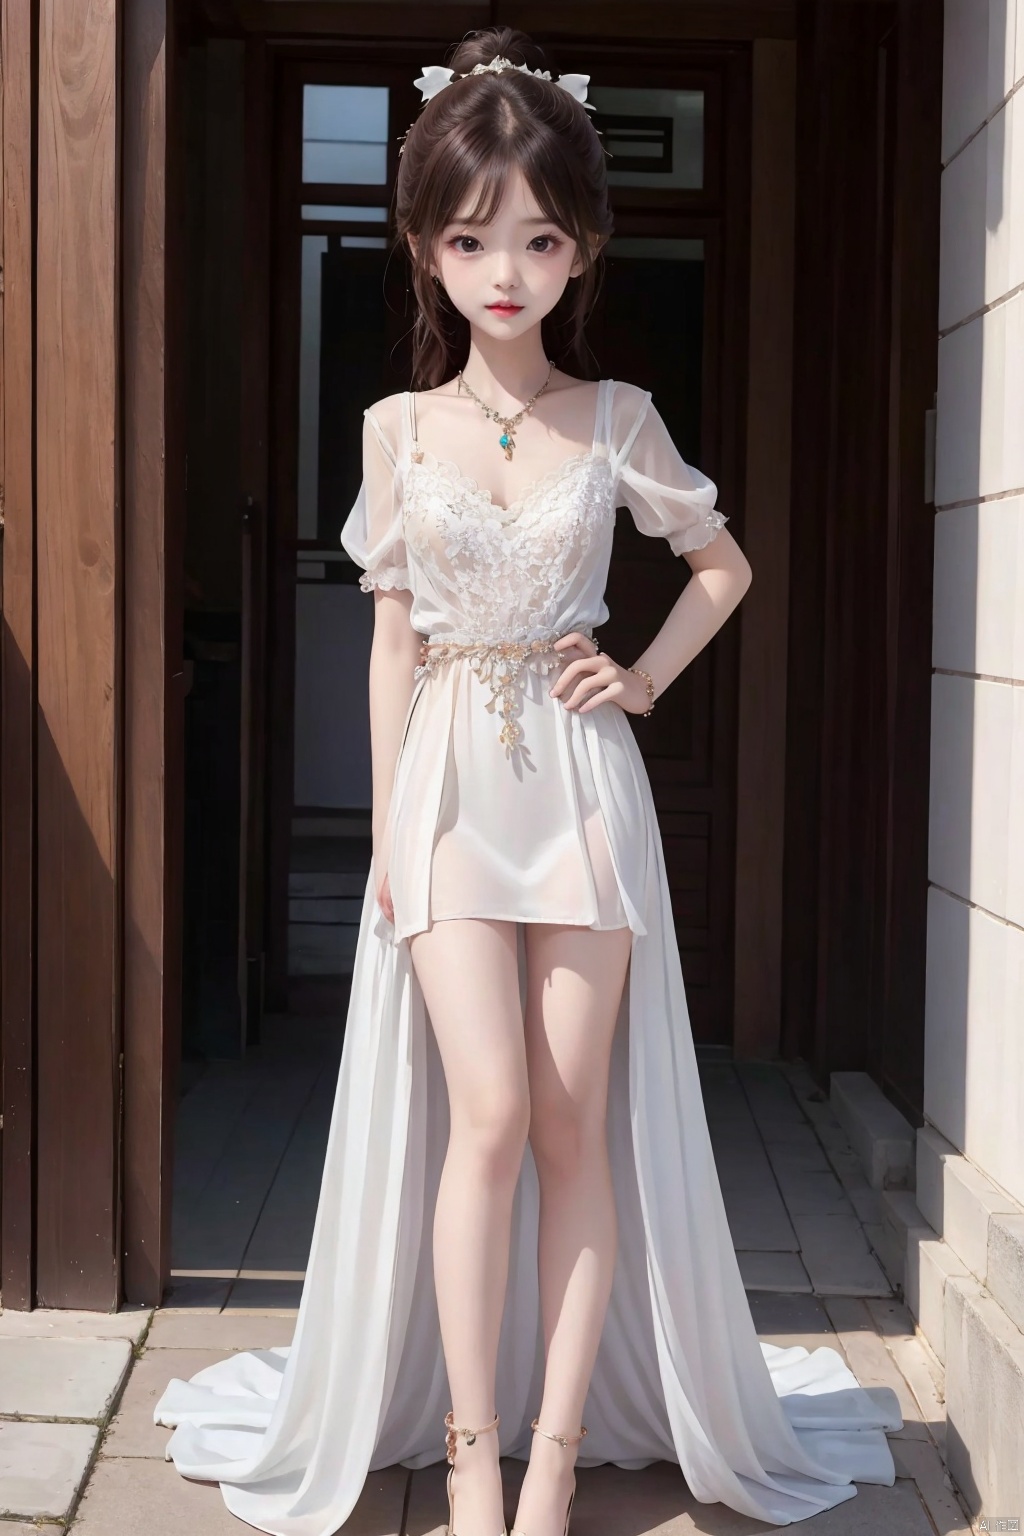  1girl,,Young children, little girls, young girls,,loli,l,8 years old,full_body,Petite,Cute,, ((((white dress,Jewelry,)))),Pupils,Seductive posture,Lovely big eyes,1girl,Double ponytail,,standing,blurry background,White skin,Sideways,,Beautiful eyes,red hair,Dynamic blur, , guofeng,Streets, guofeng, pf-hd,梨涡彤彤